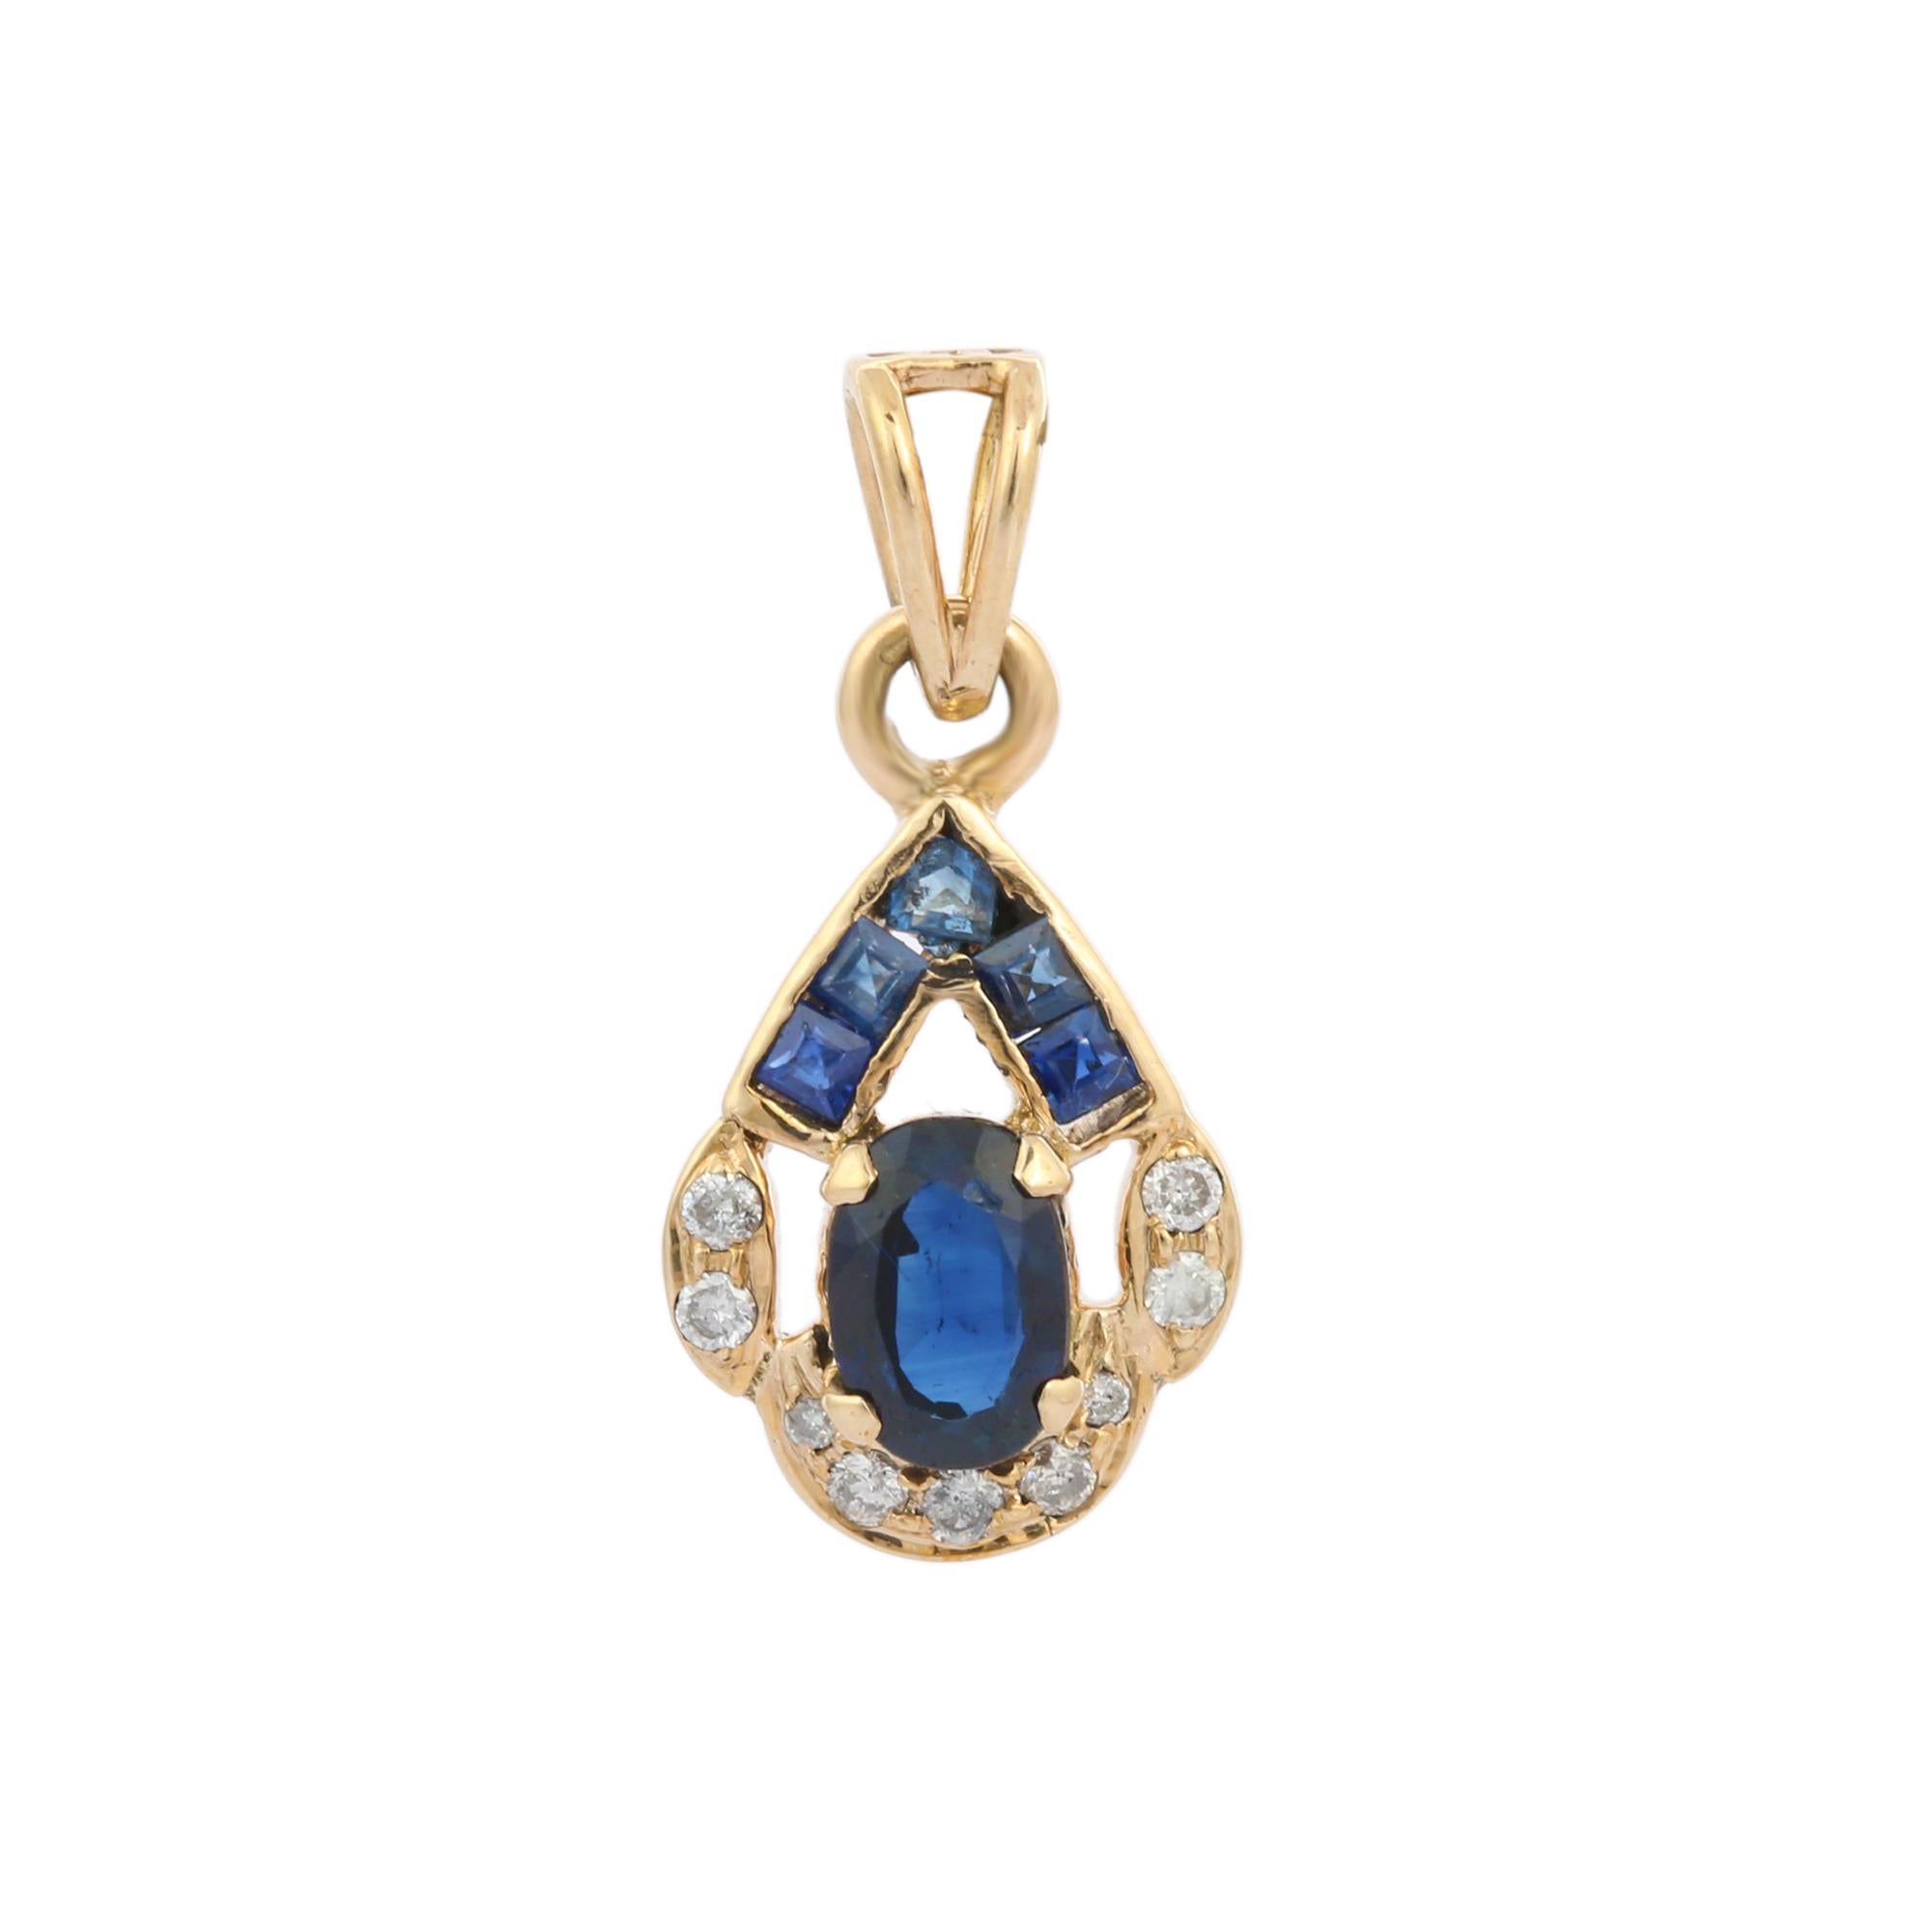 Natural Blue Sapphire Art Deco Style pendant in 14K Gold. It has oval and square cut sapphires with studded diamond that completes your look with a decent touch. Pendants are used to wear or gifted to represent love and promises. It's an attractive